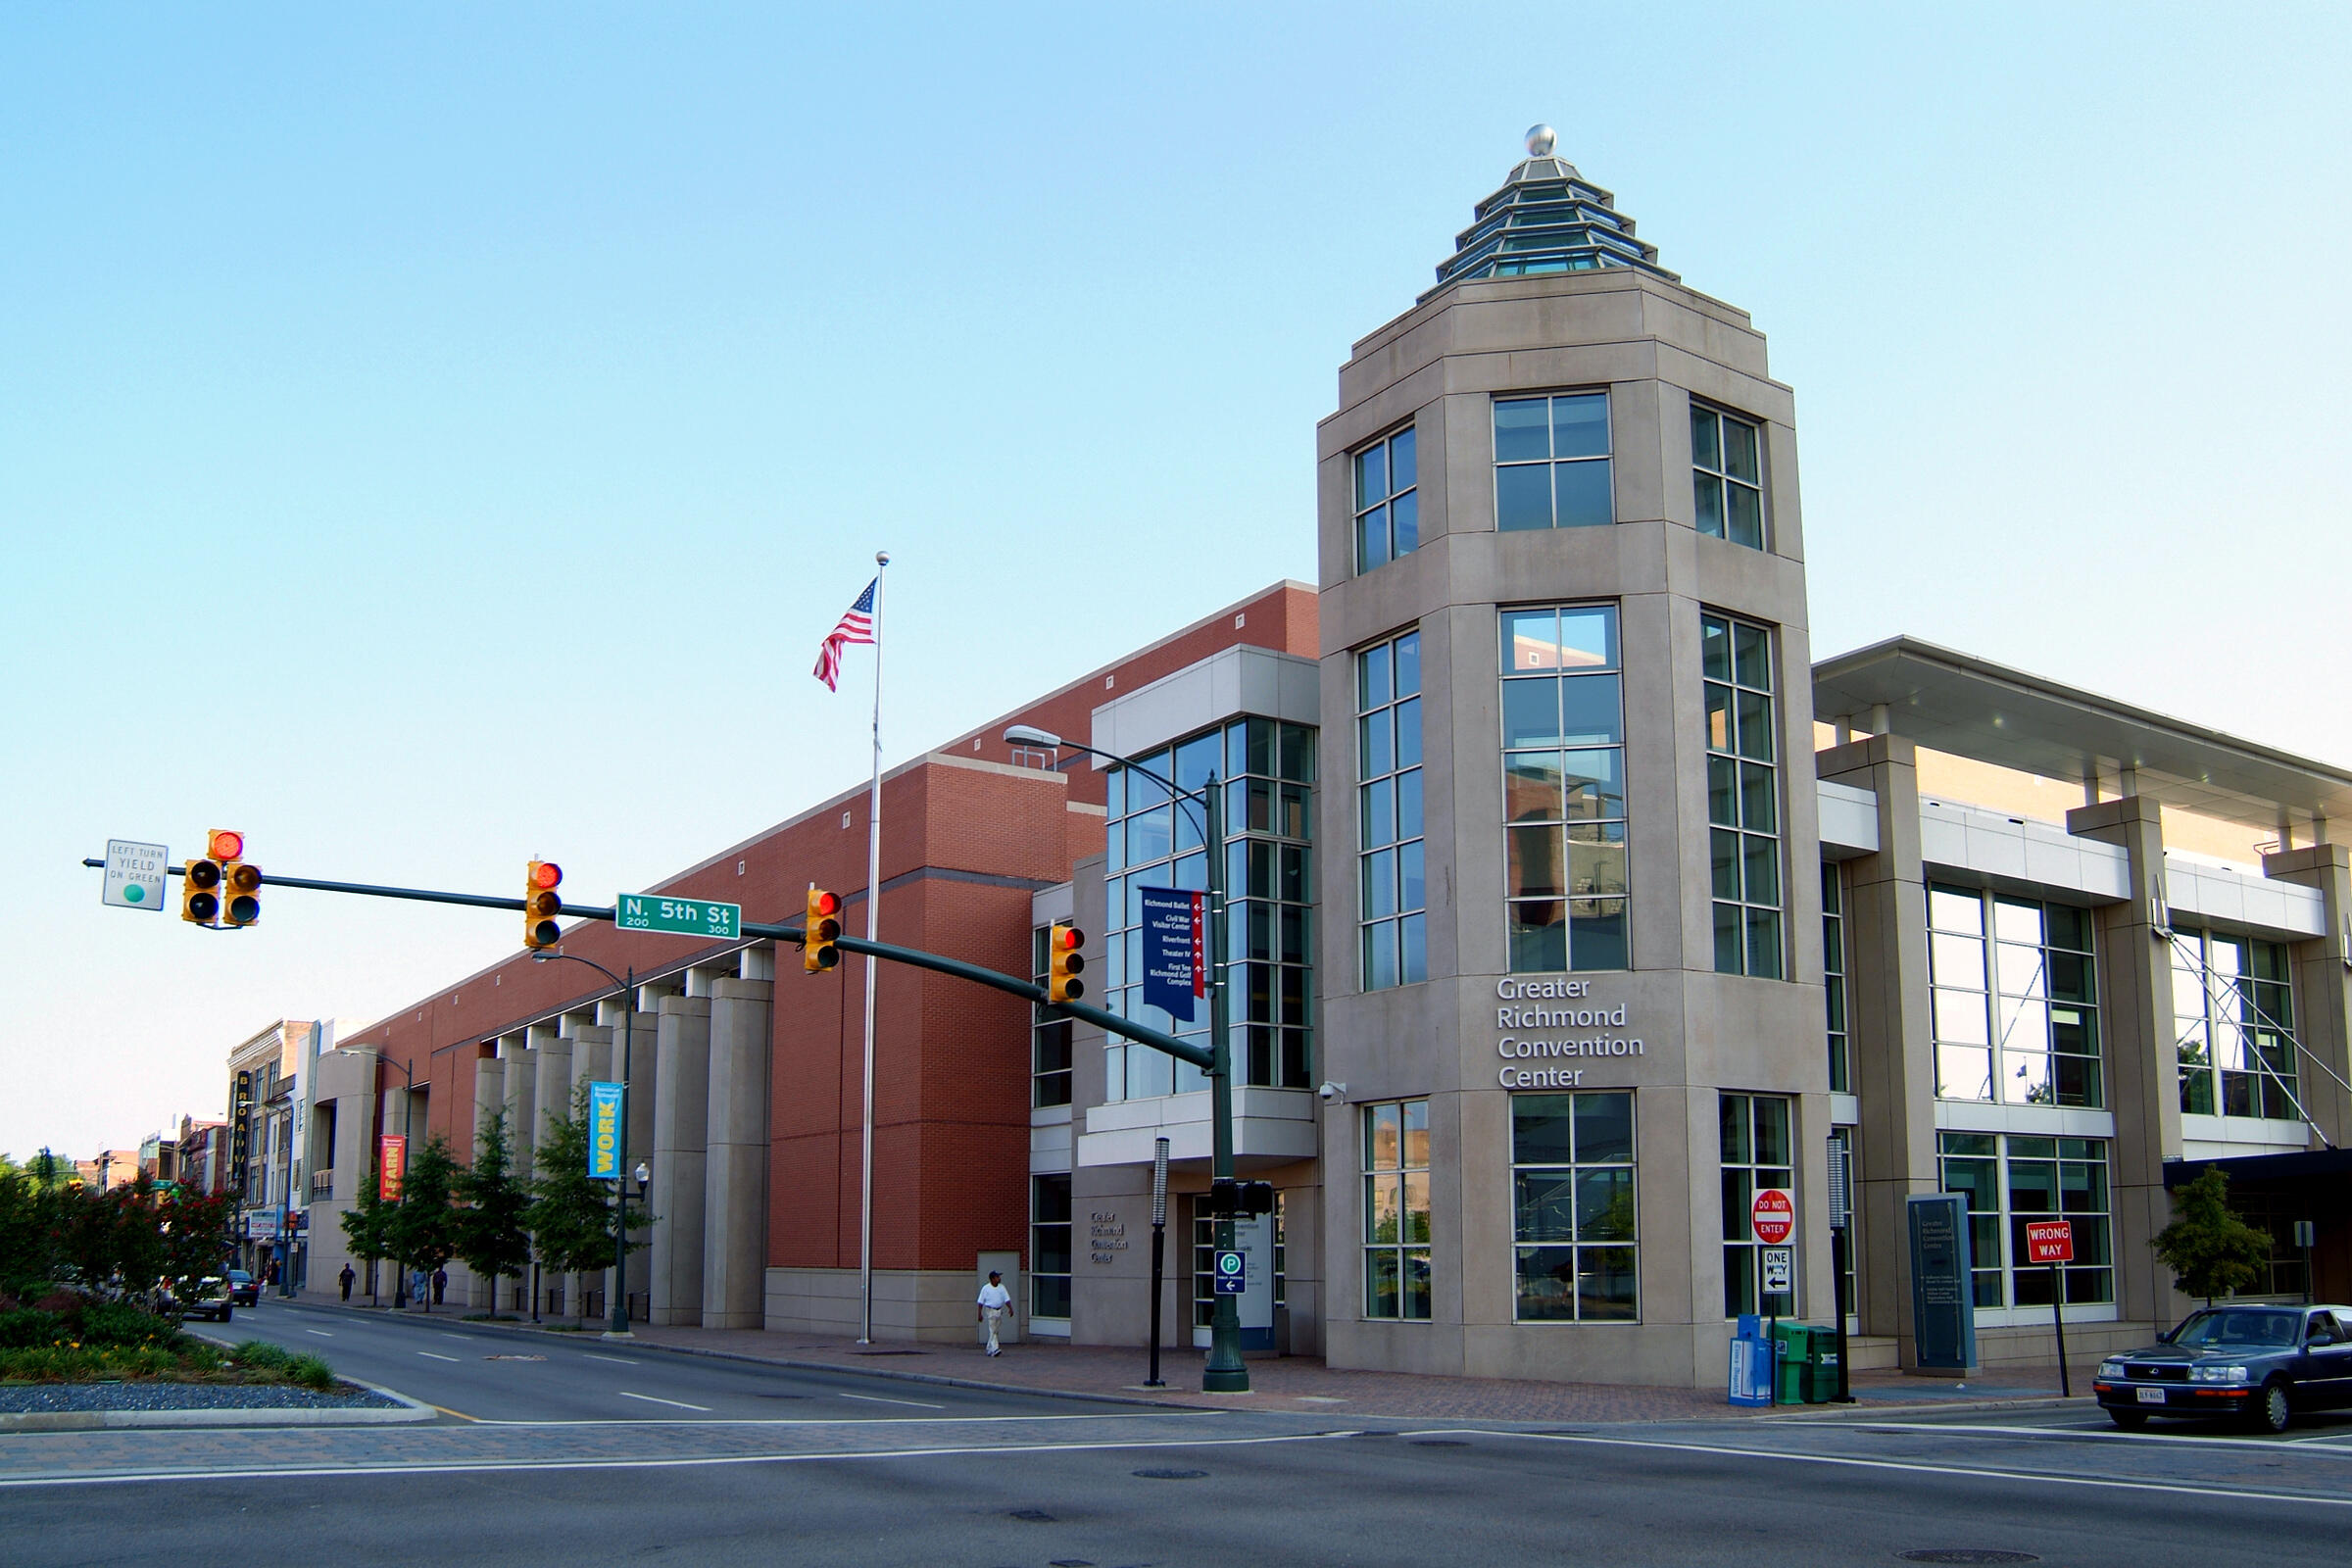 The Greater Richmond Convention Center